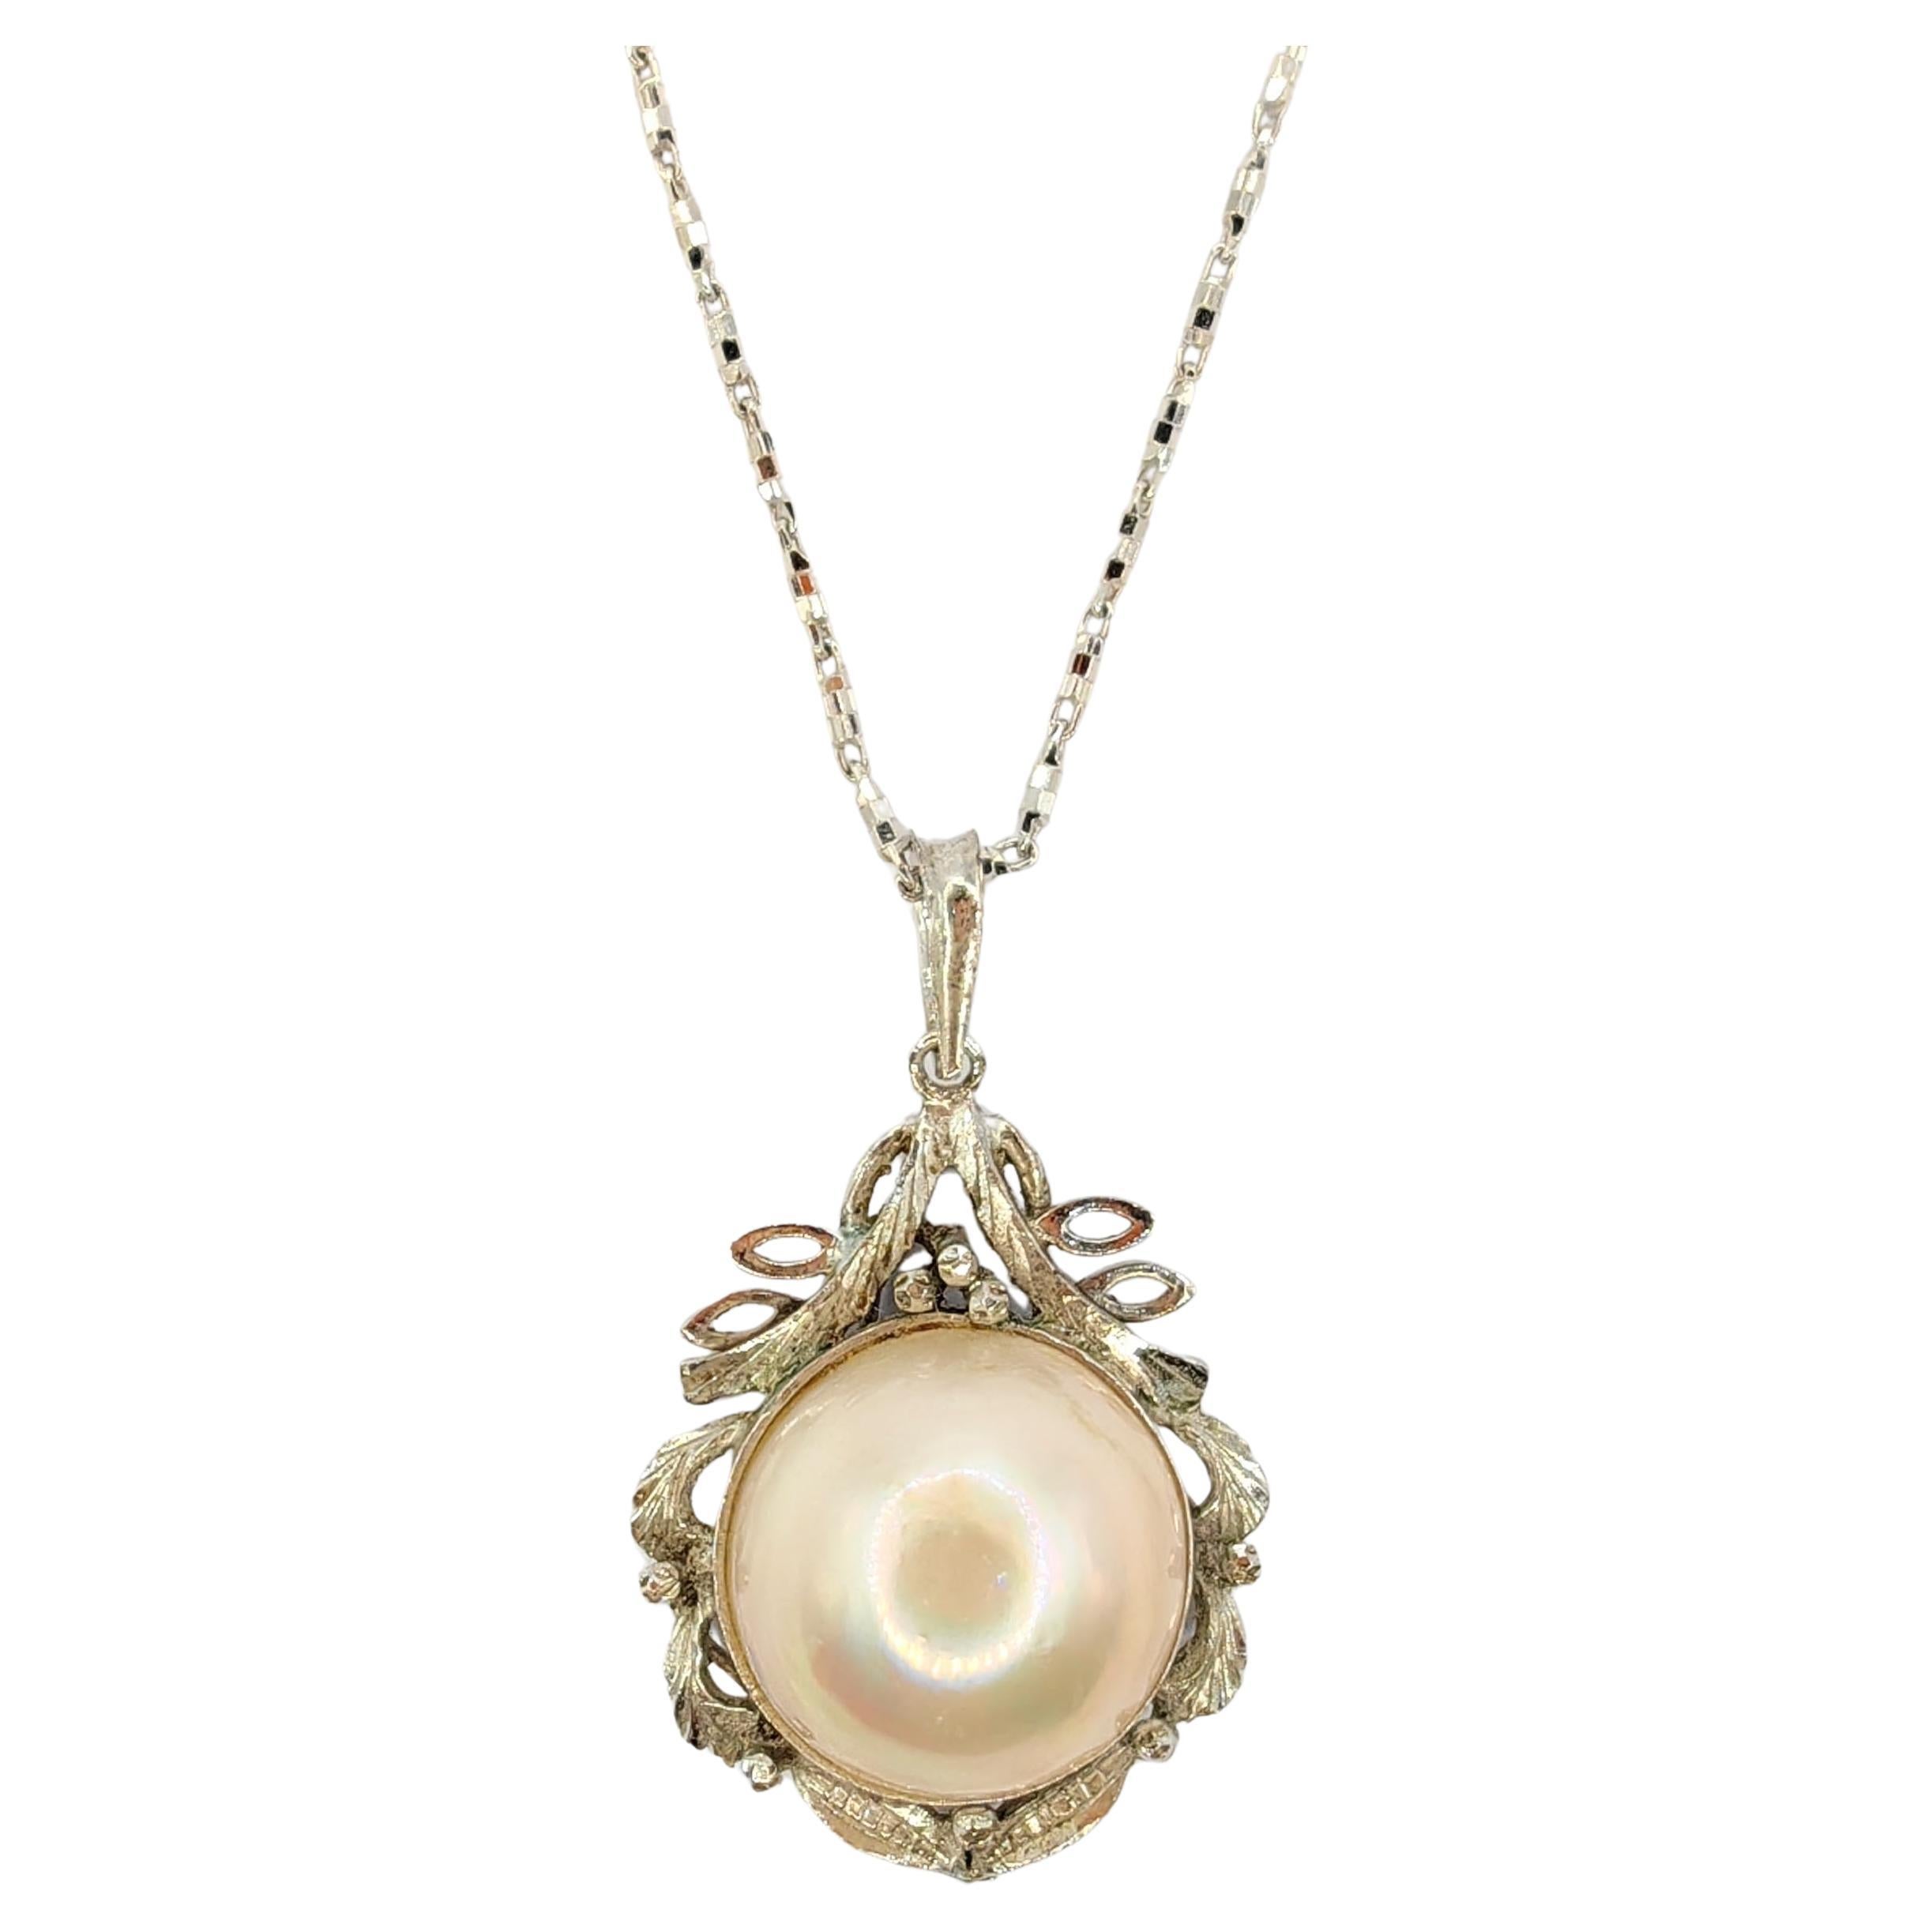 Vintage Baroque Style 14mm Mabé Pearl Necklace Pendant in Sterling Silver For Sale